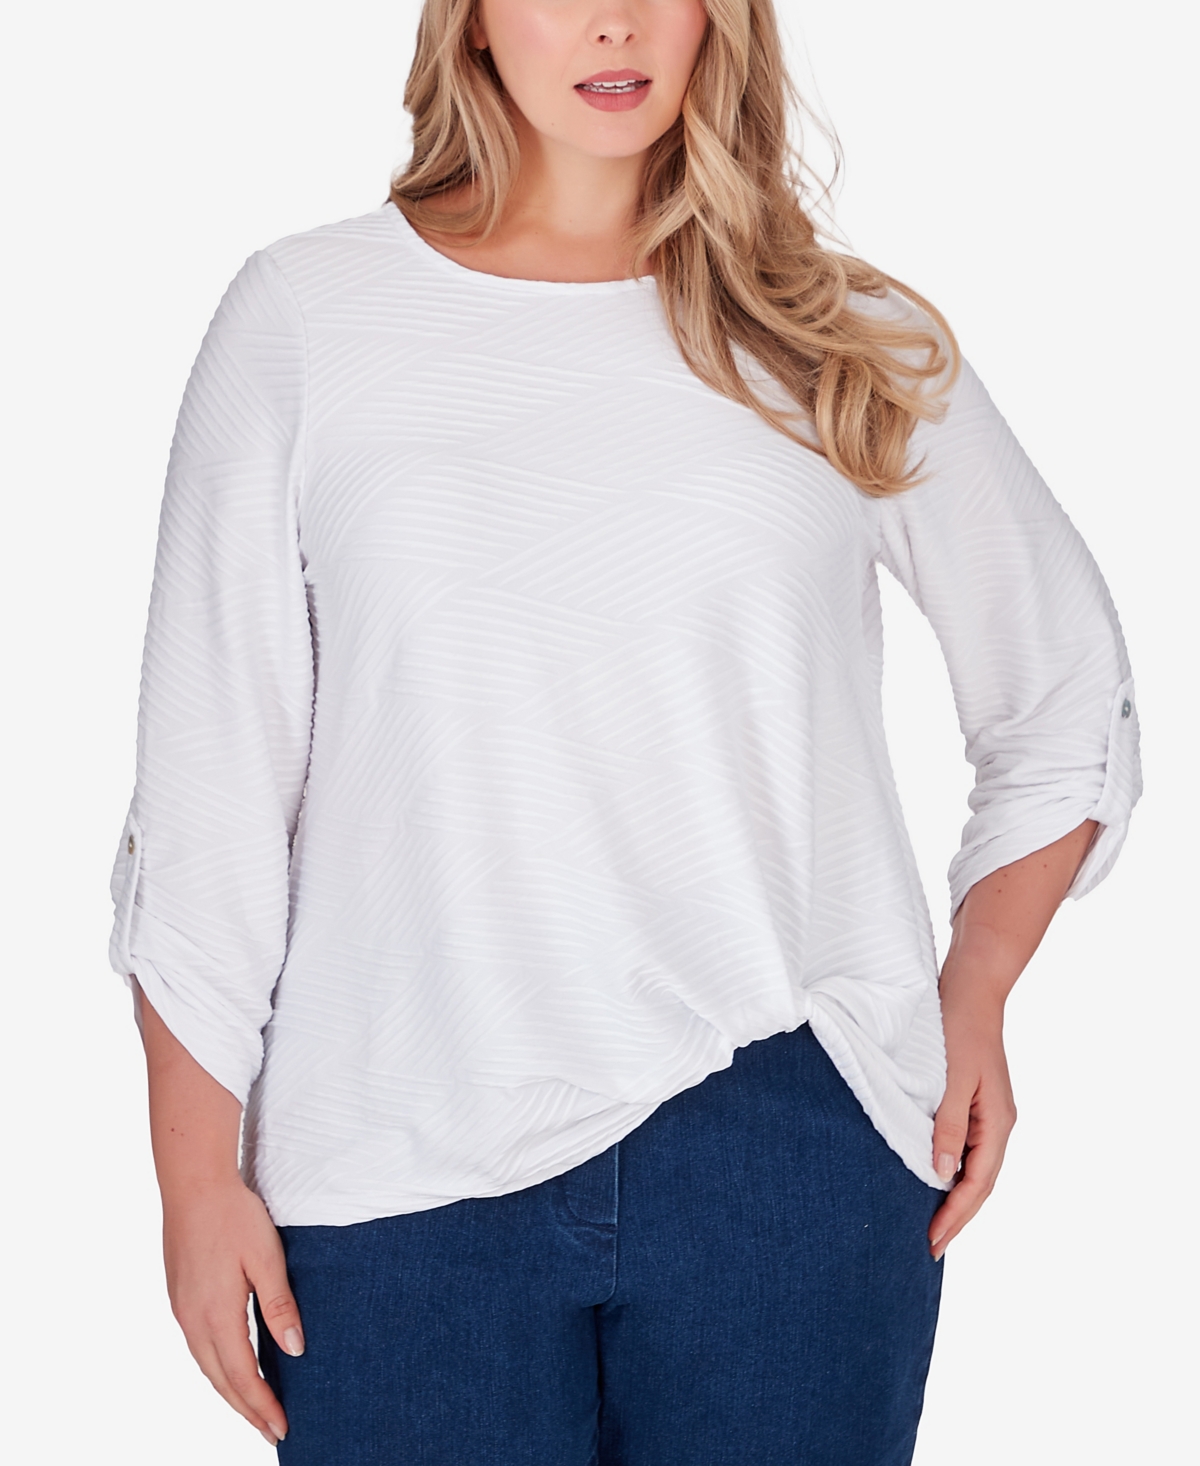 Plus Size Scoop Neck Textured Knit Top with Side Detail - White